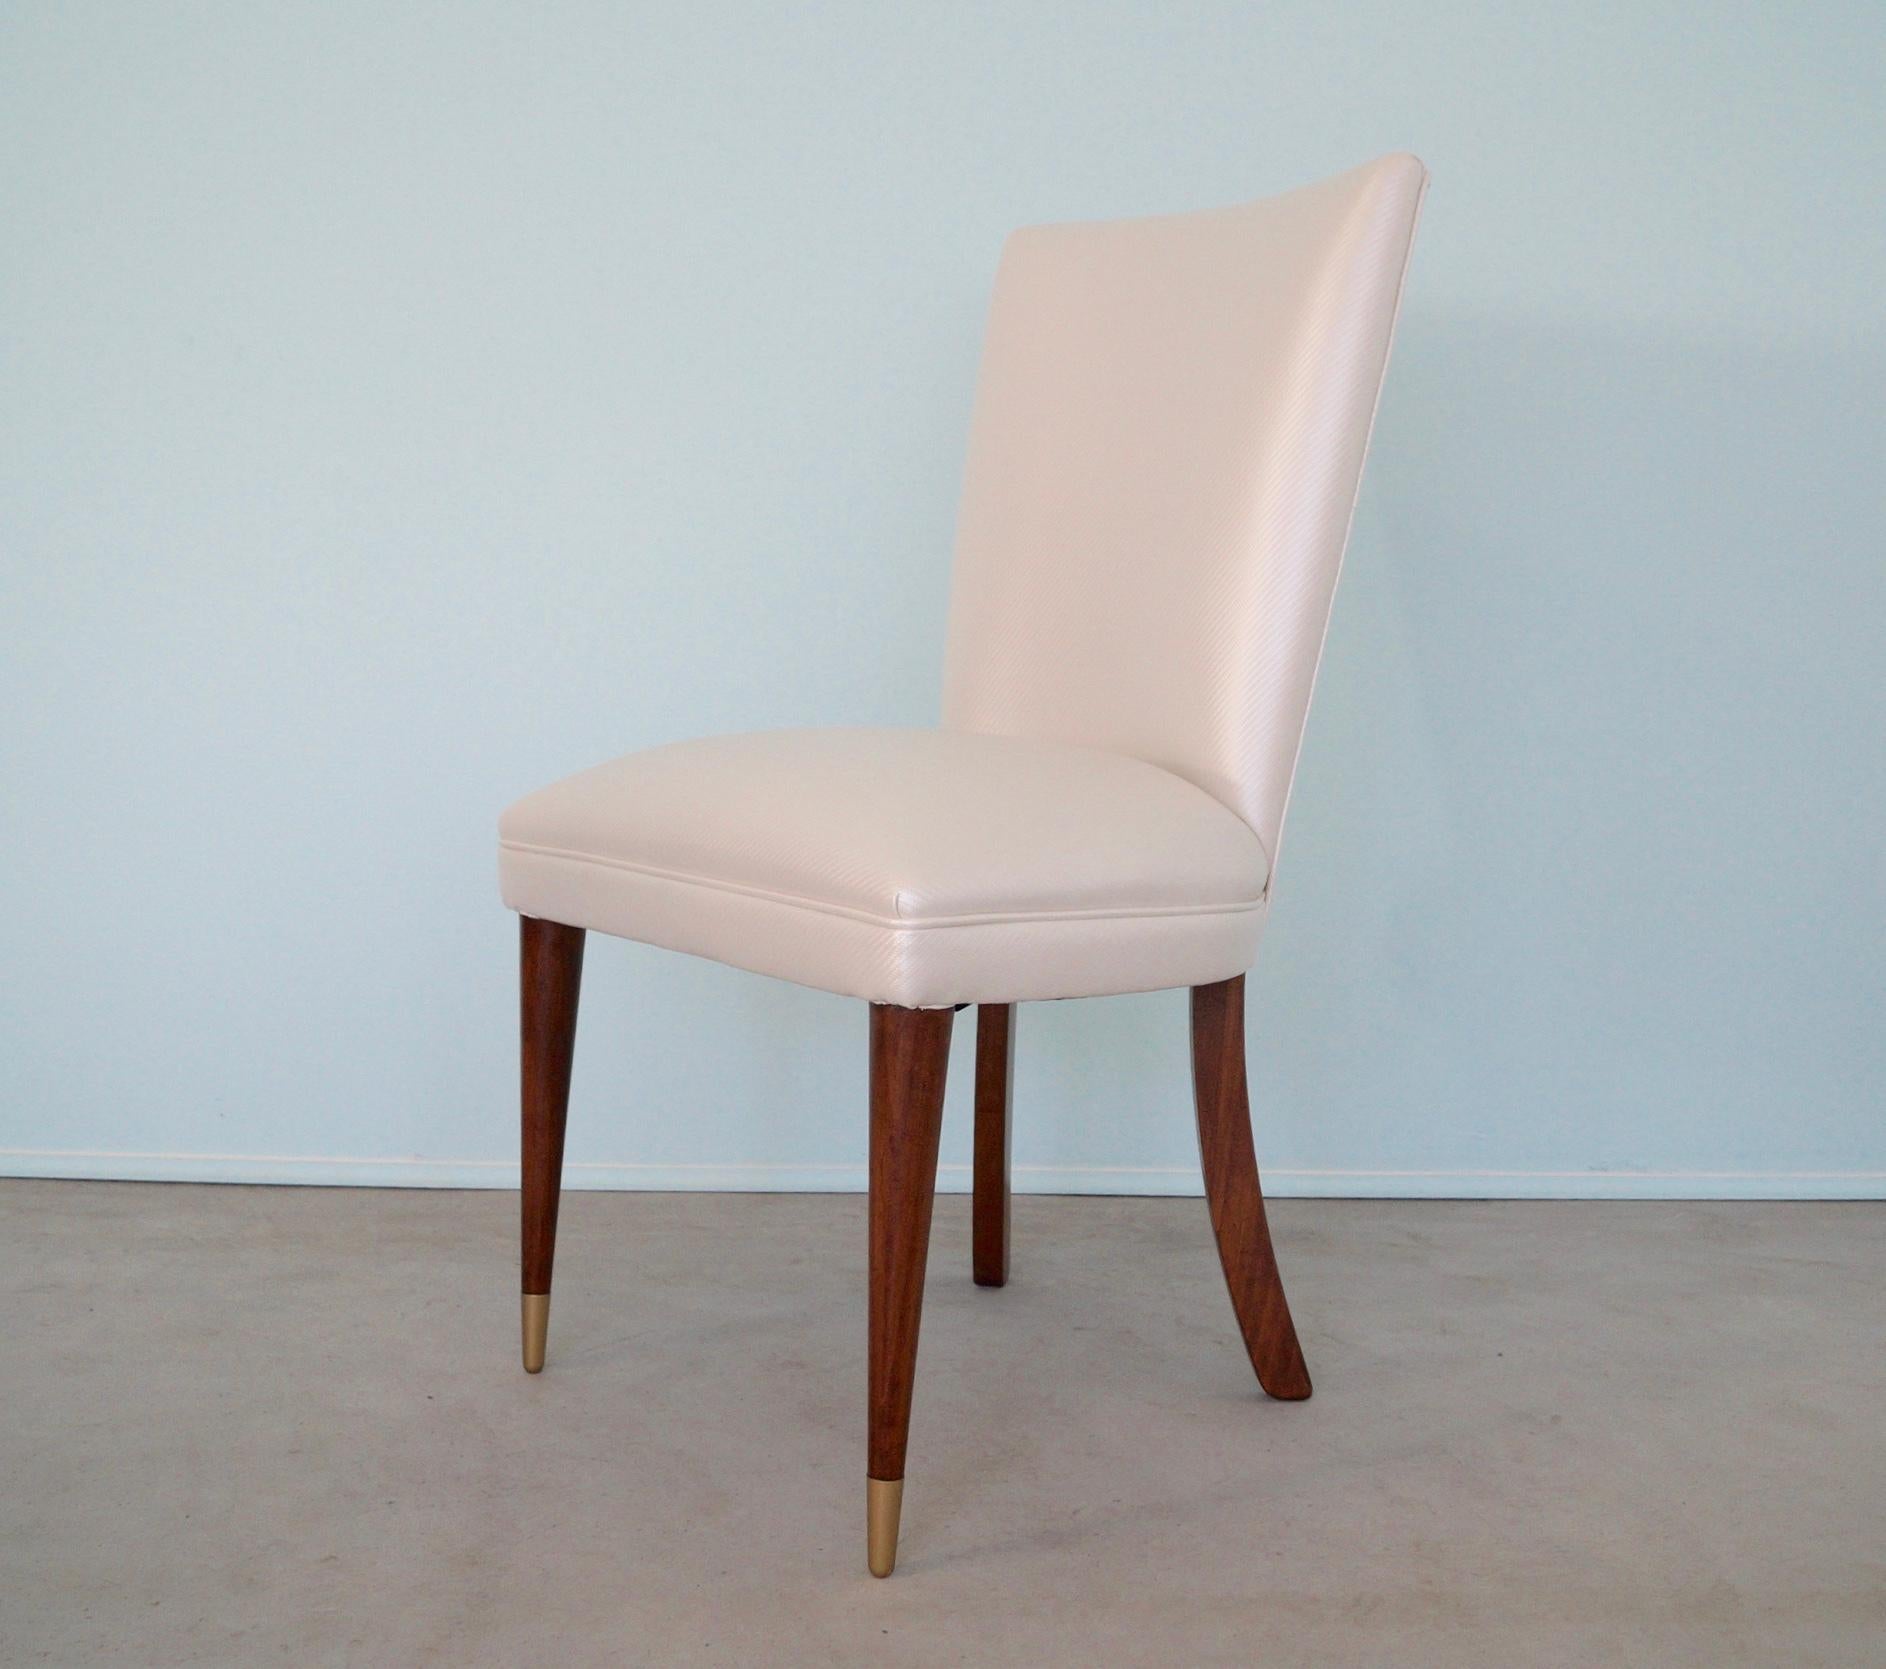 1950's Mid-Century Modern Hollywood Regency Dining Chairs - Set of 4 For Sale 7